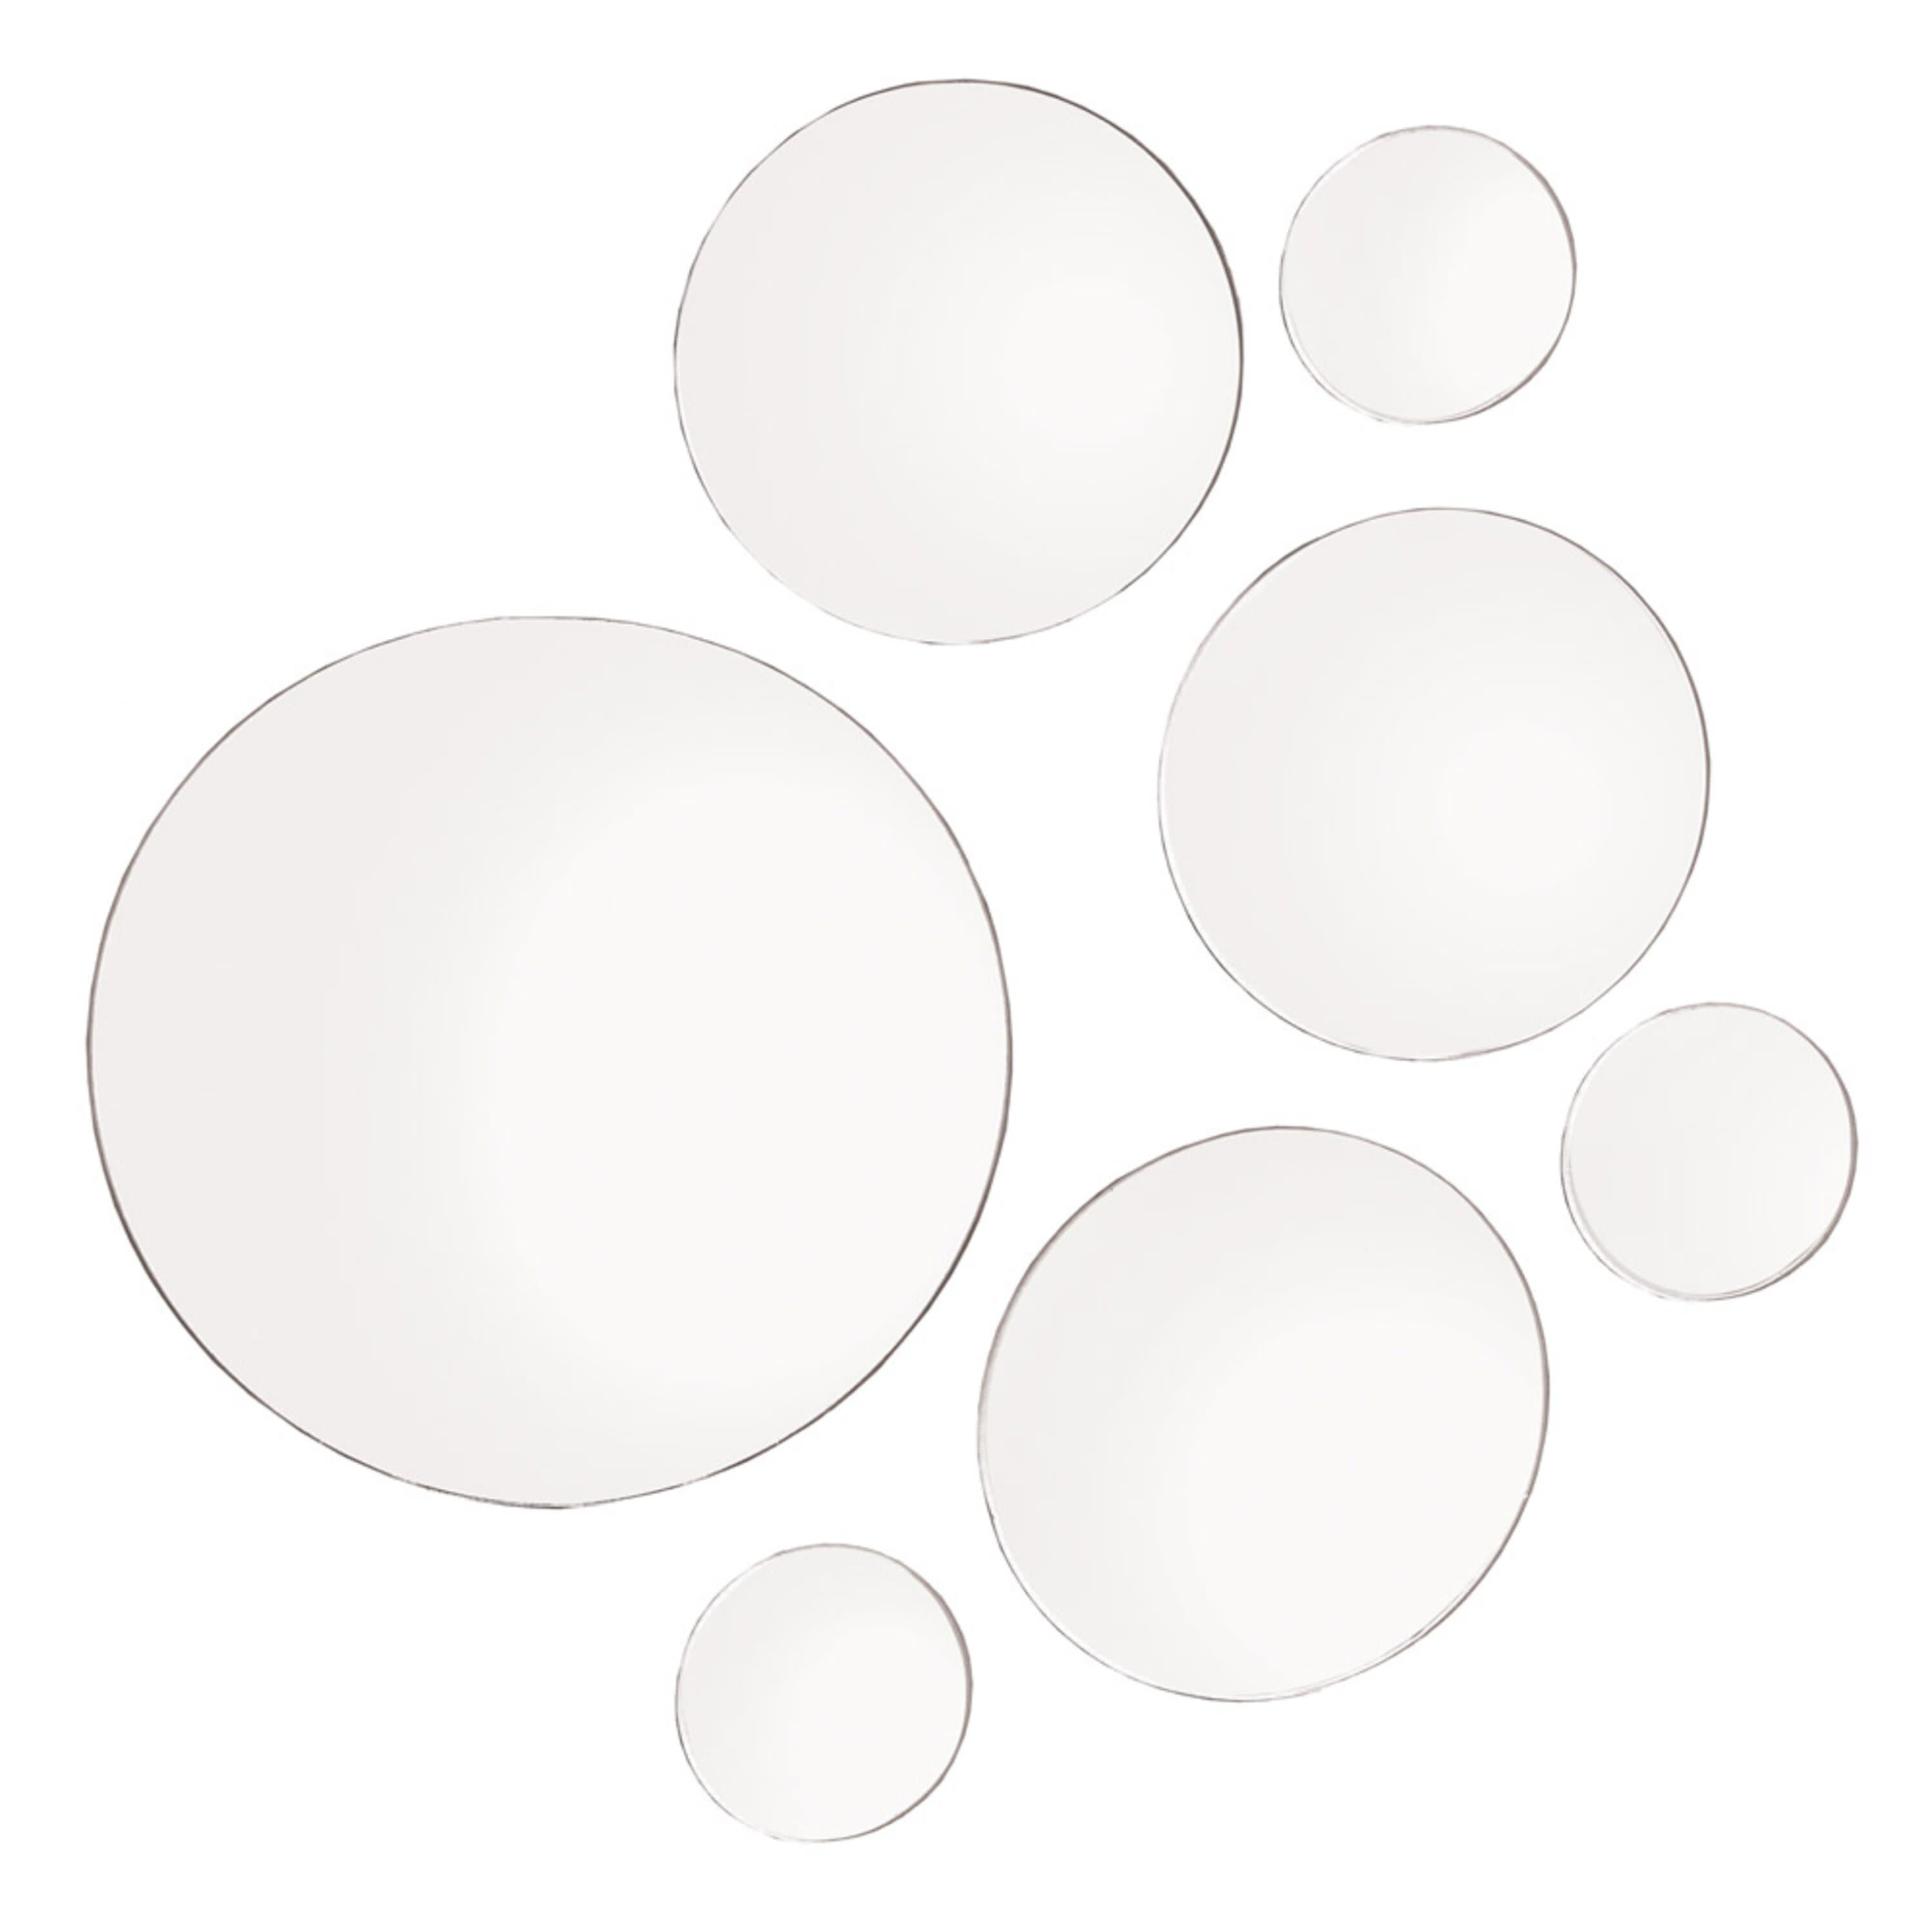 Elements Set of 7 Round Mirrors, 9-inch, 6-inch and 3-inch - image 3 of 4